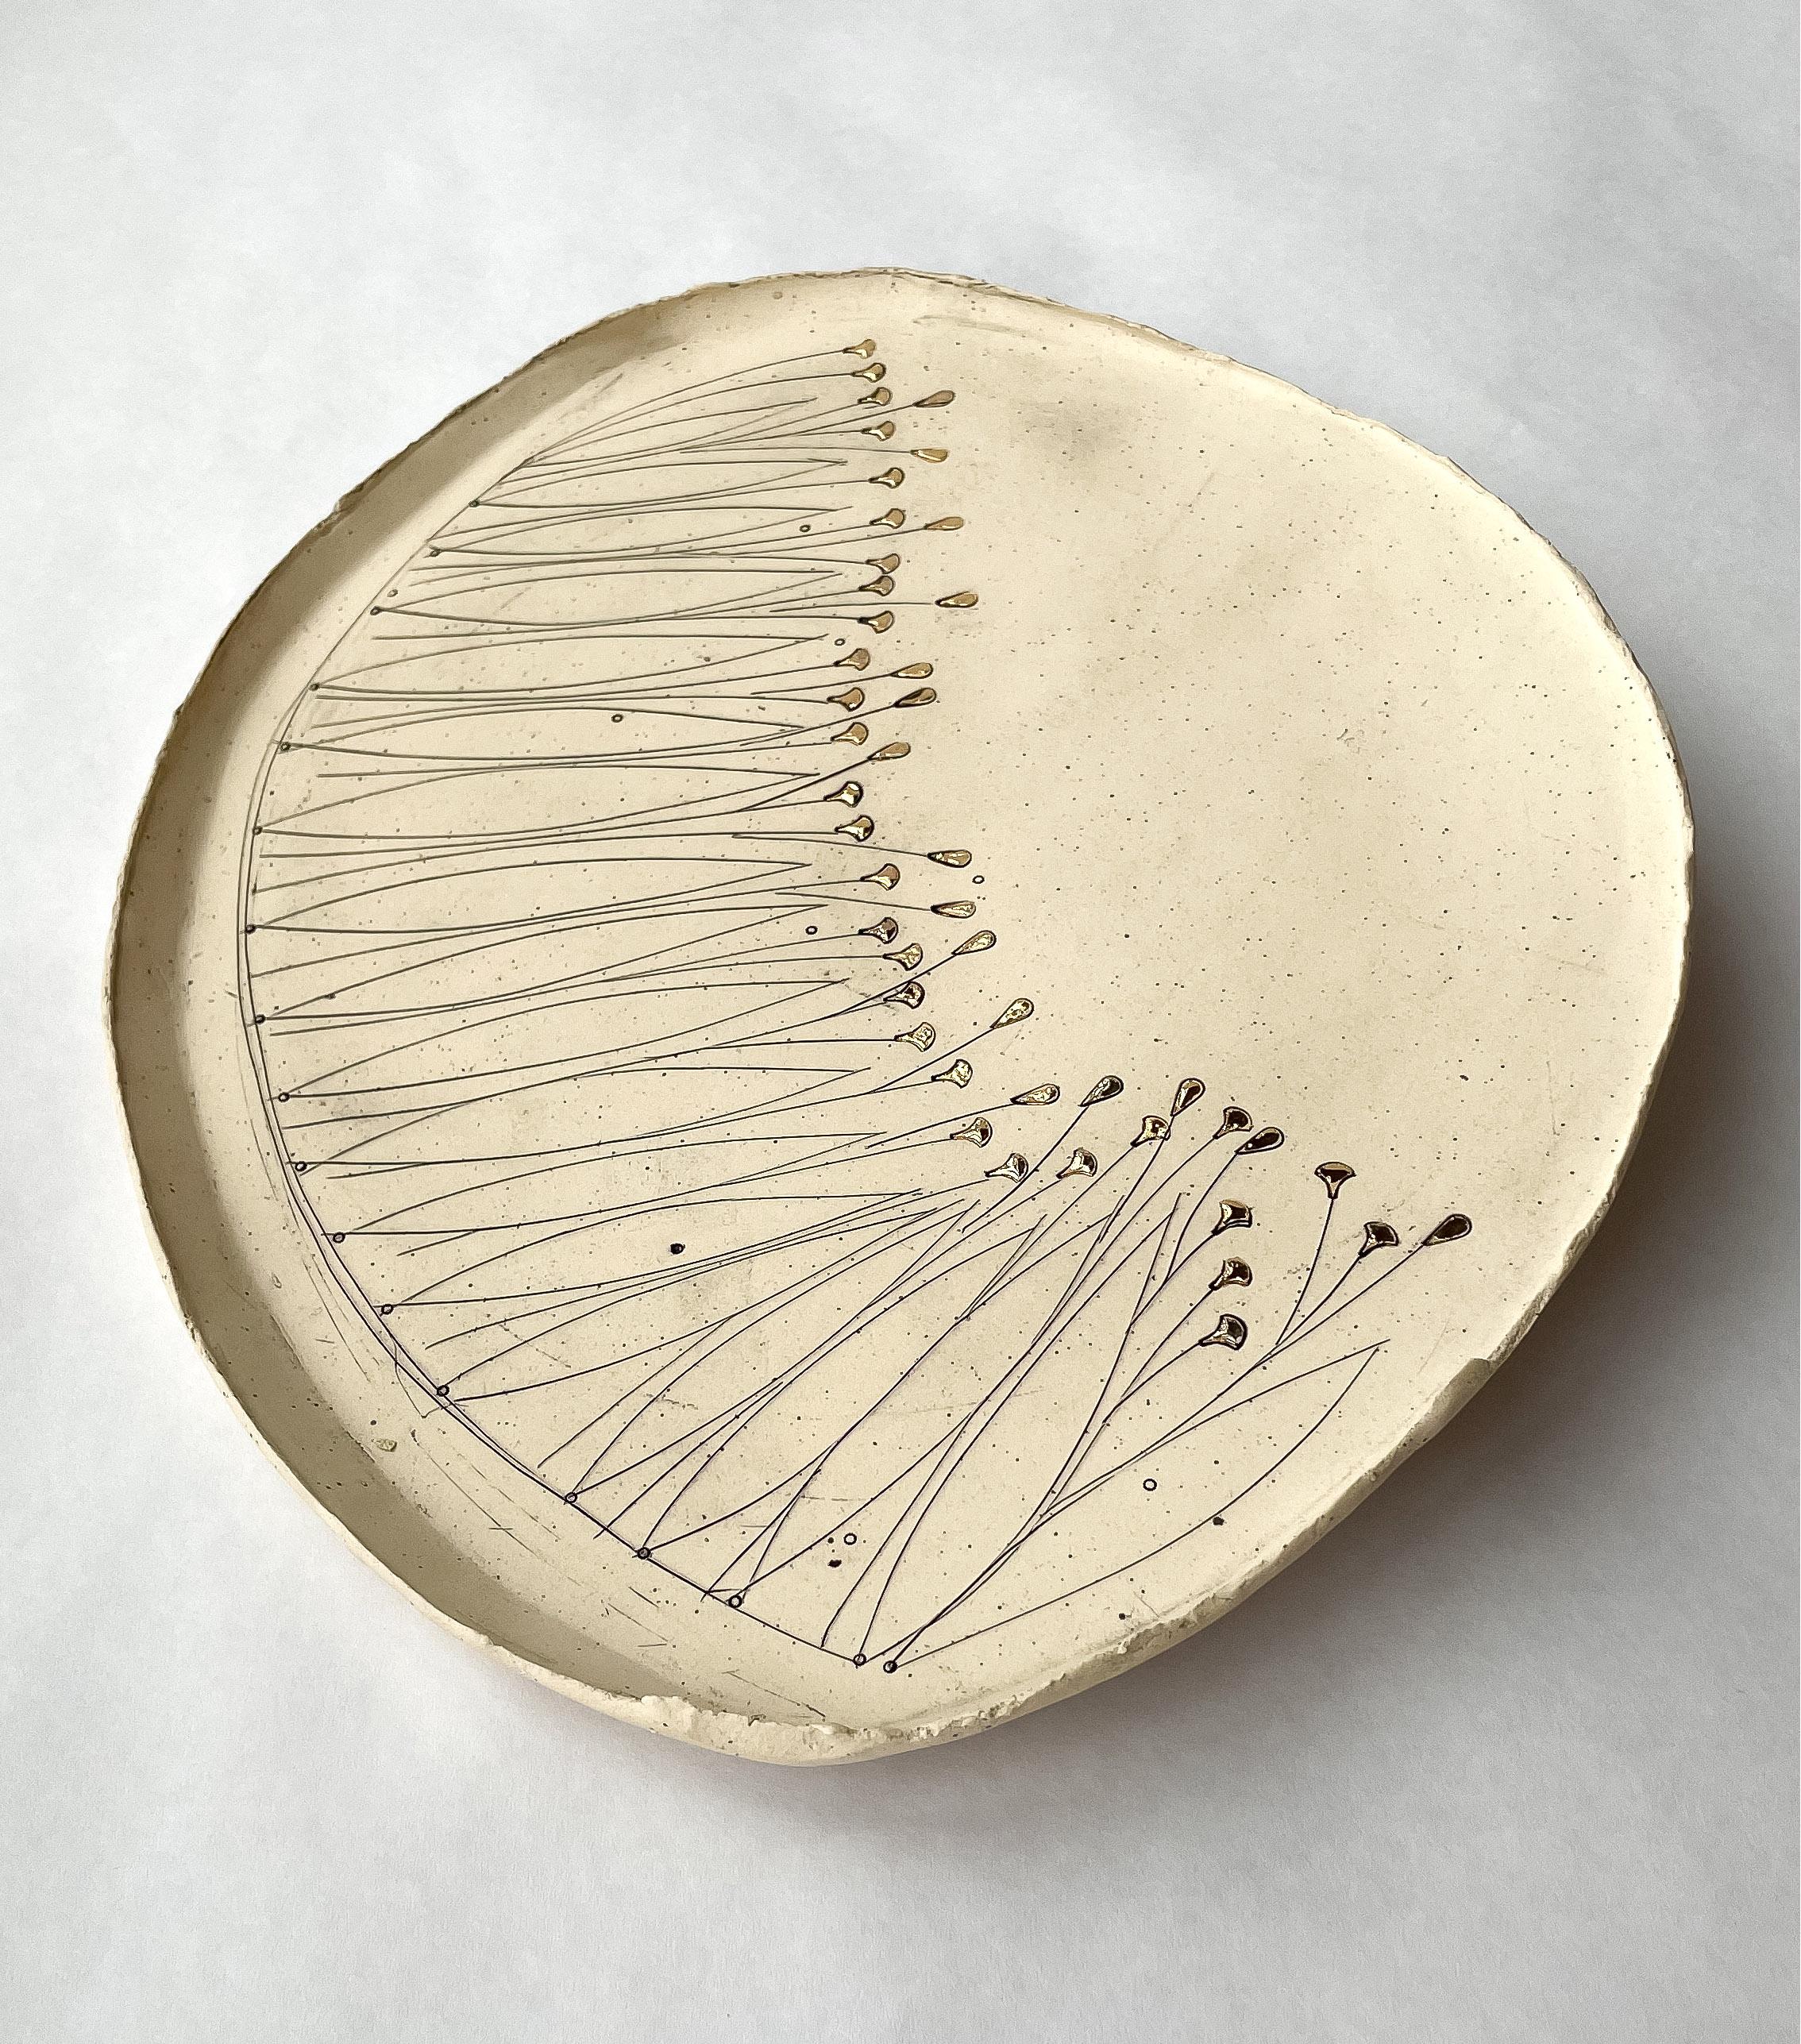 419-G Hand Crafted Golden Promise Fine Fronds Tray With 22kt Gold Detail by Helen Prior

A delicate hand-crafted tray, organic in shape with a torn clay edge in natural speckled stoneware clay.
Part of the Golden Promise Series-  a theme of